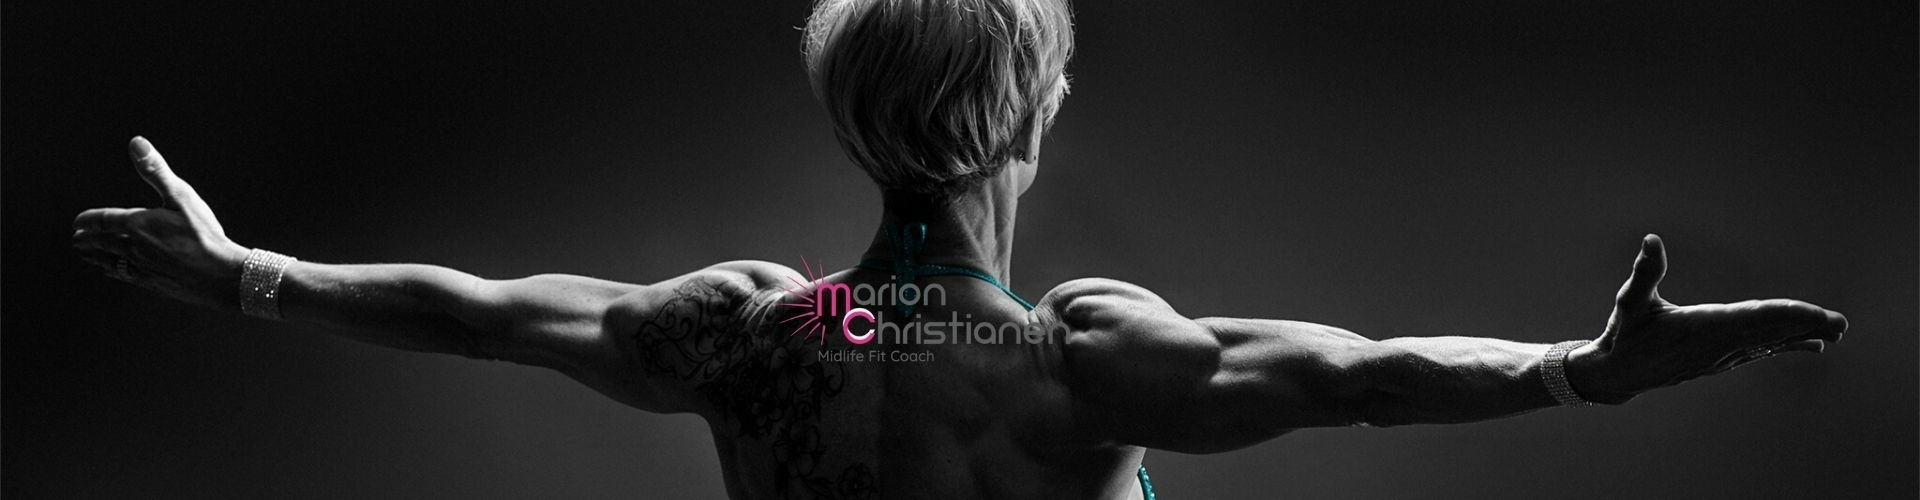 midlife fit coach marion christianen